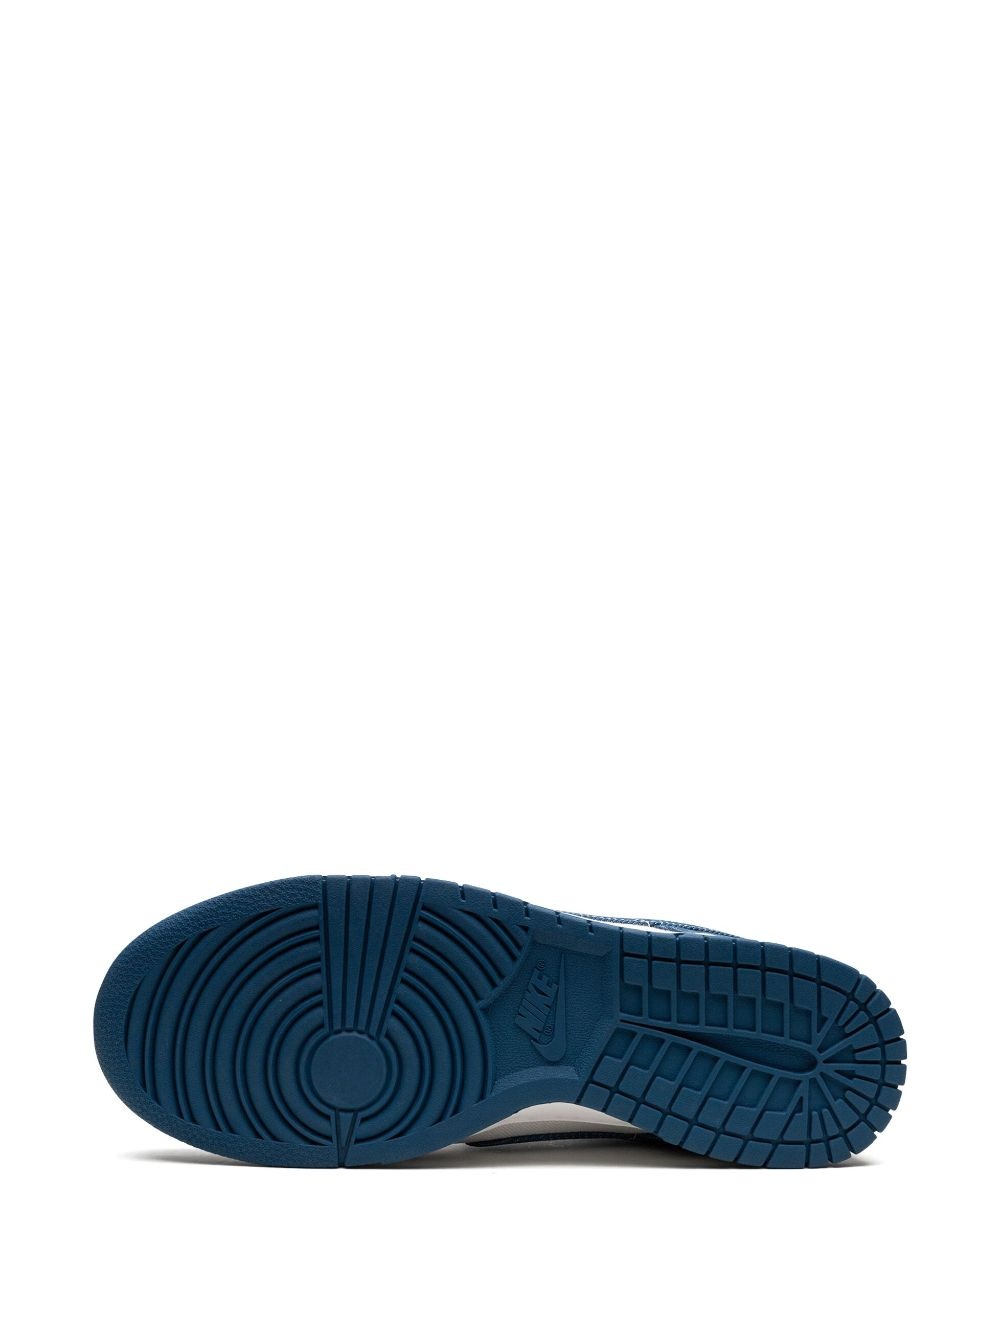 Dunk Low Shashiko "Industrial Blue" sneakers - 4